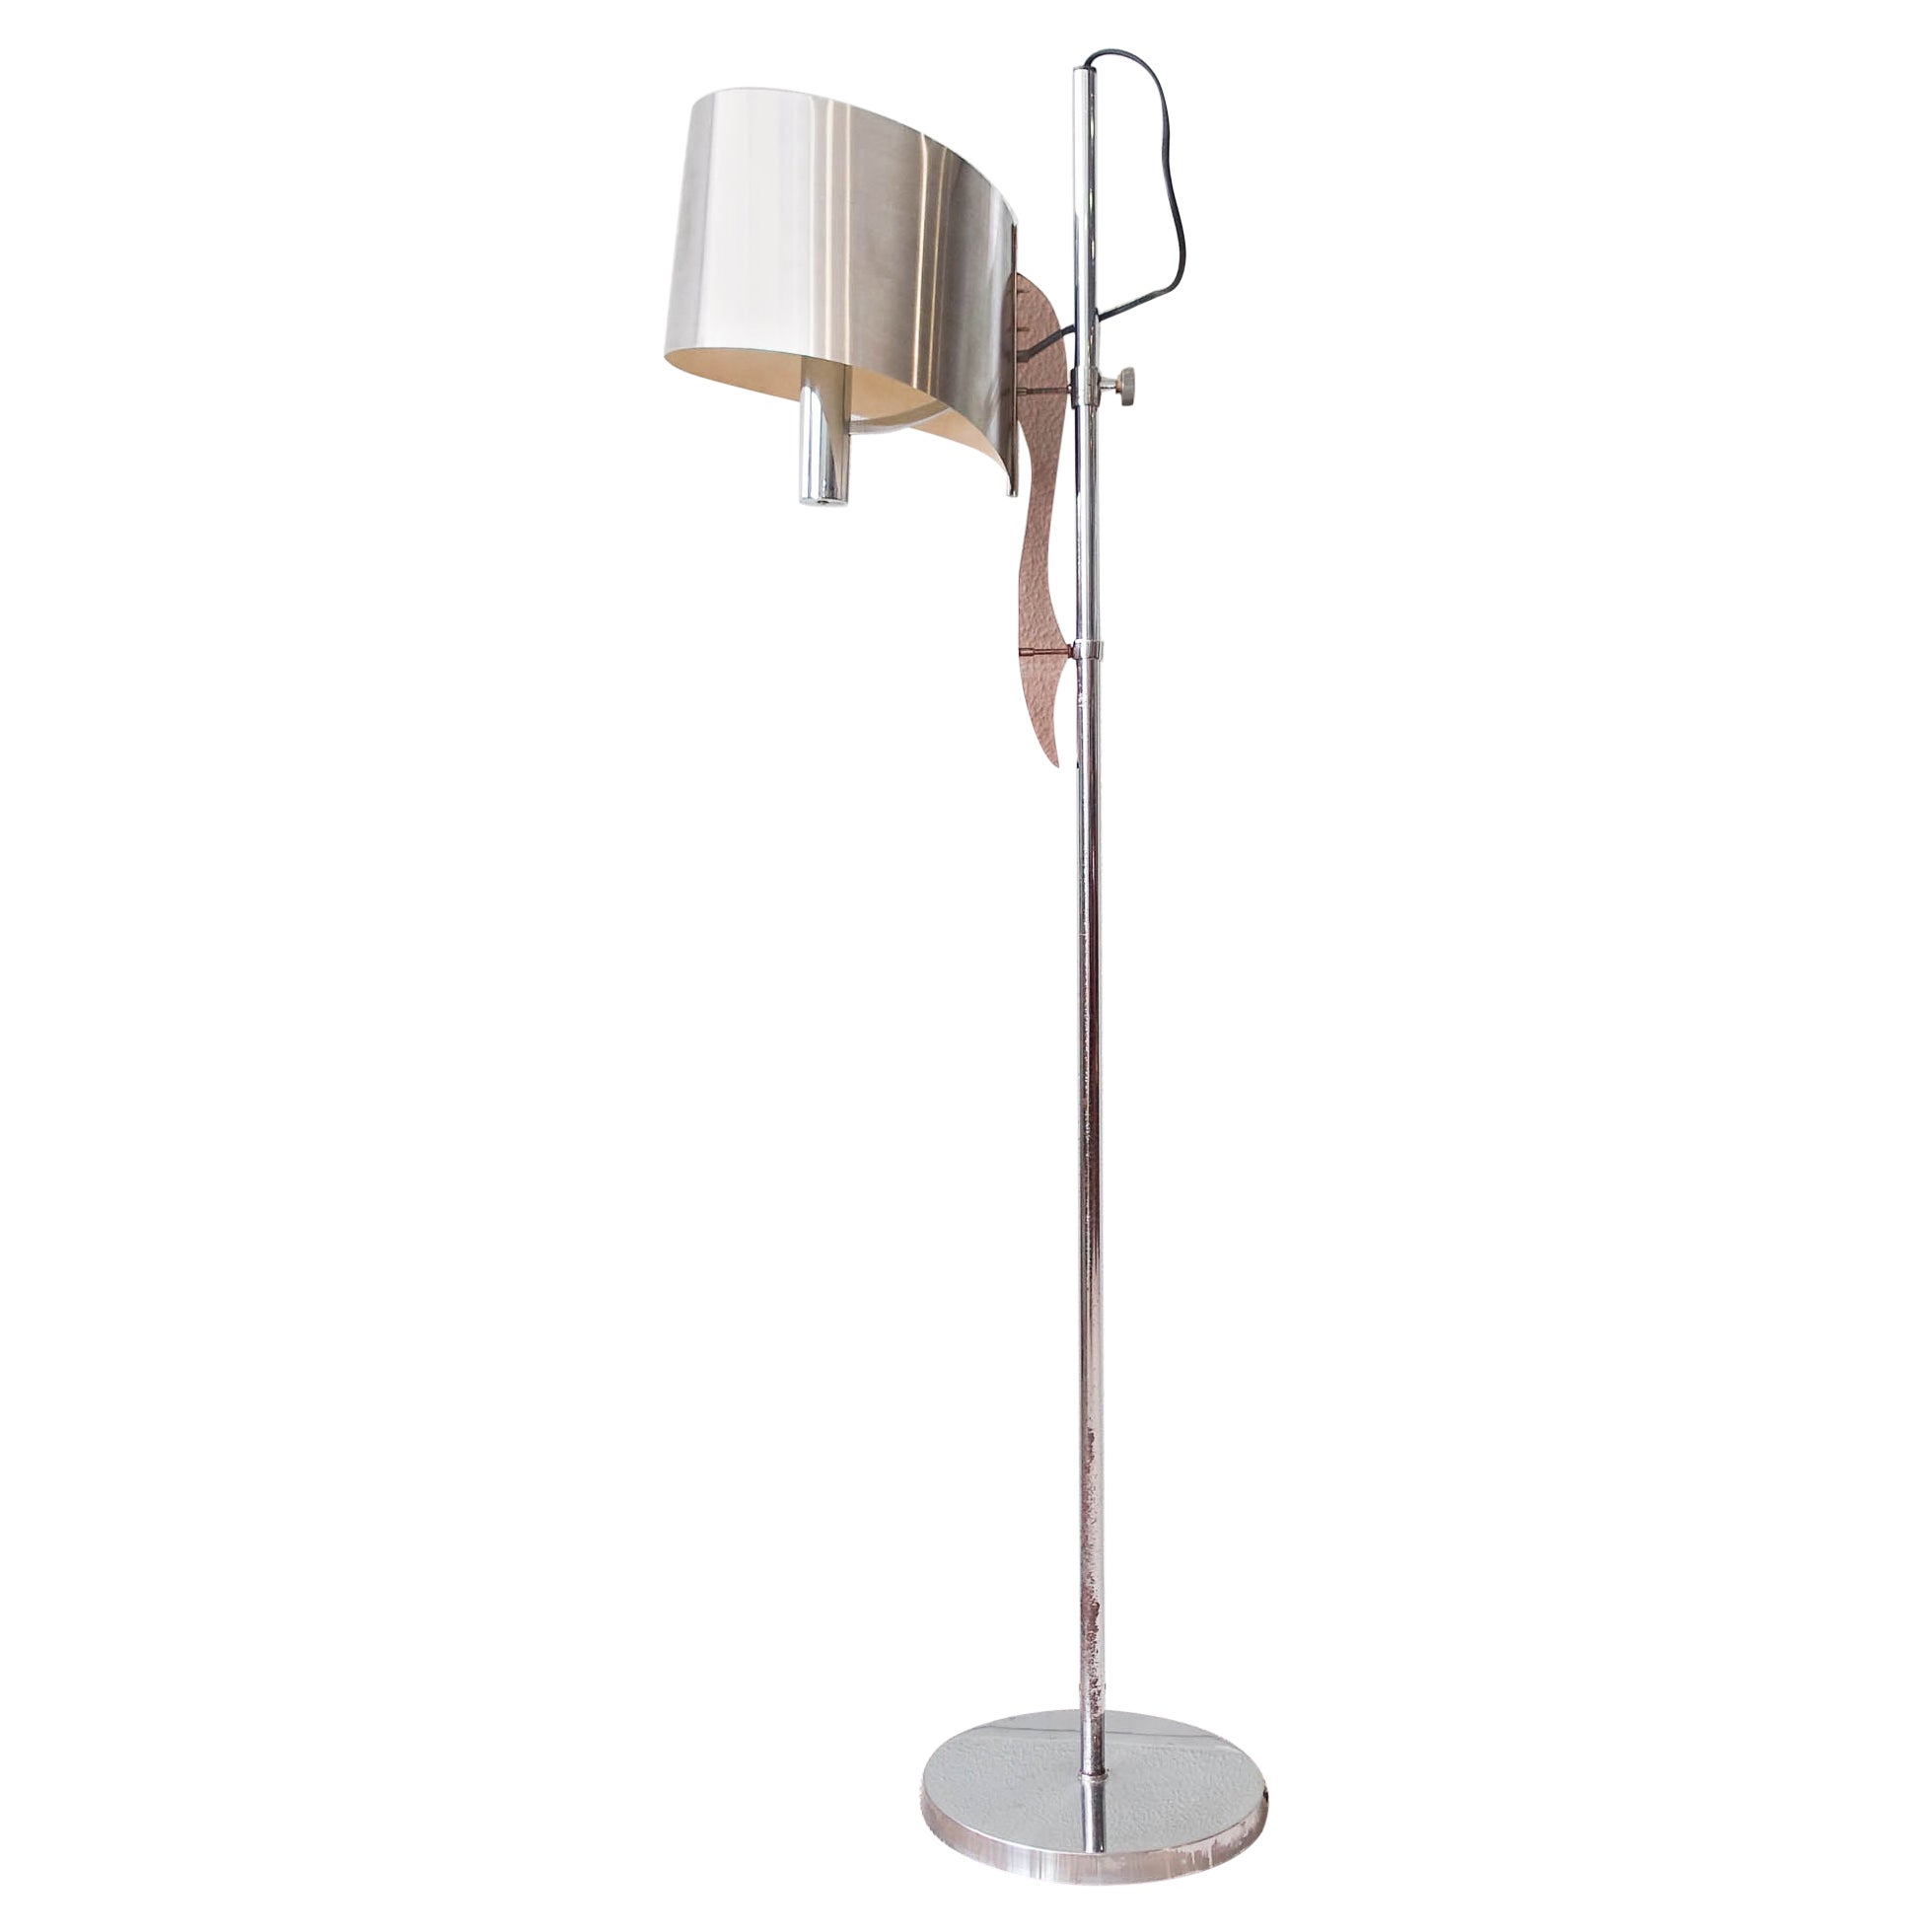 French Sculptural Floor Lamp "Ruban" By Jacques Charles for Maison Charles